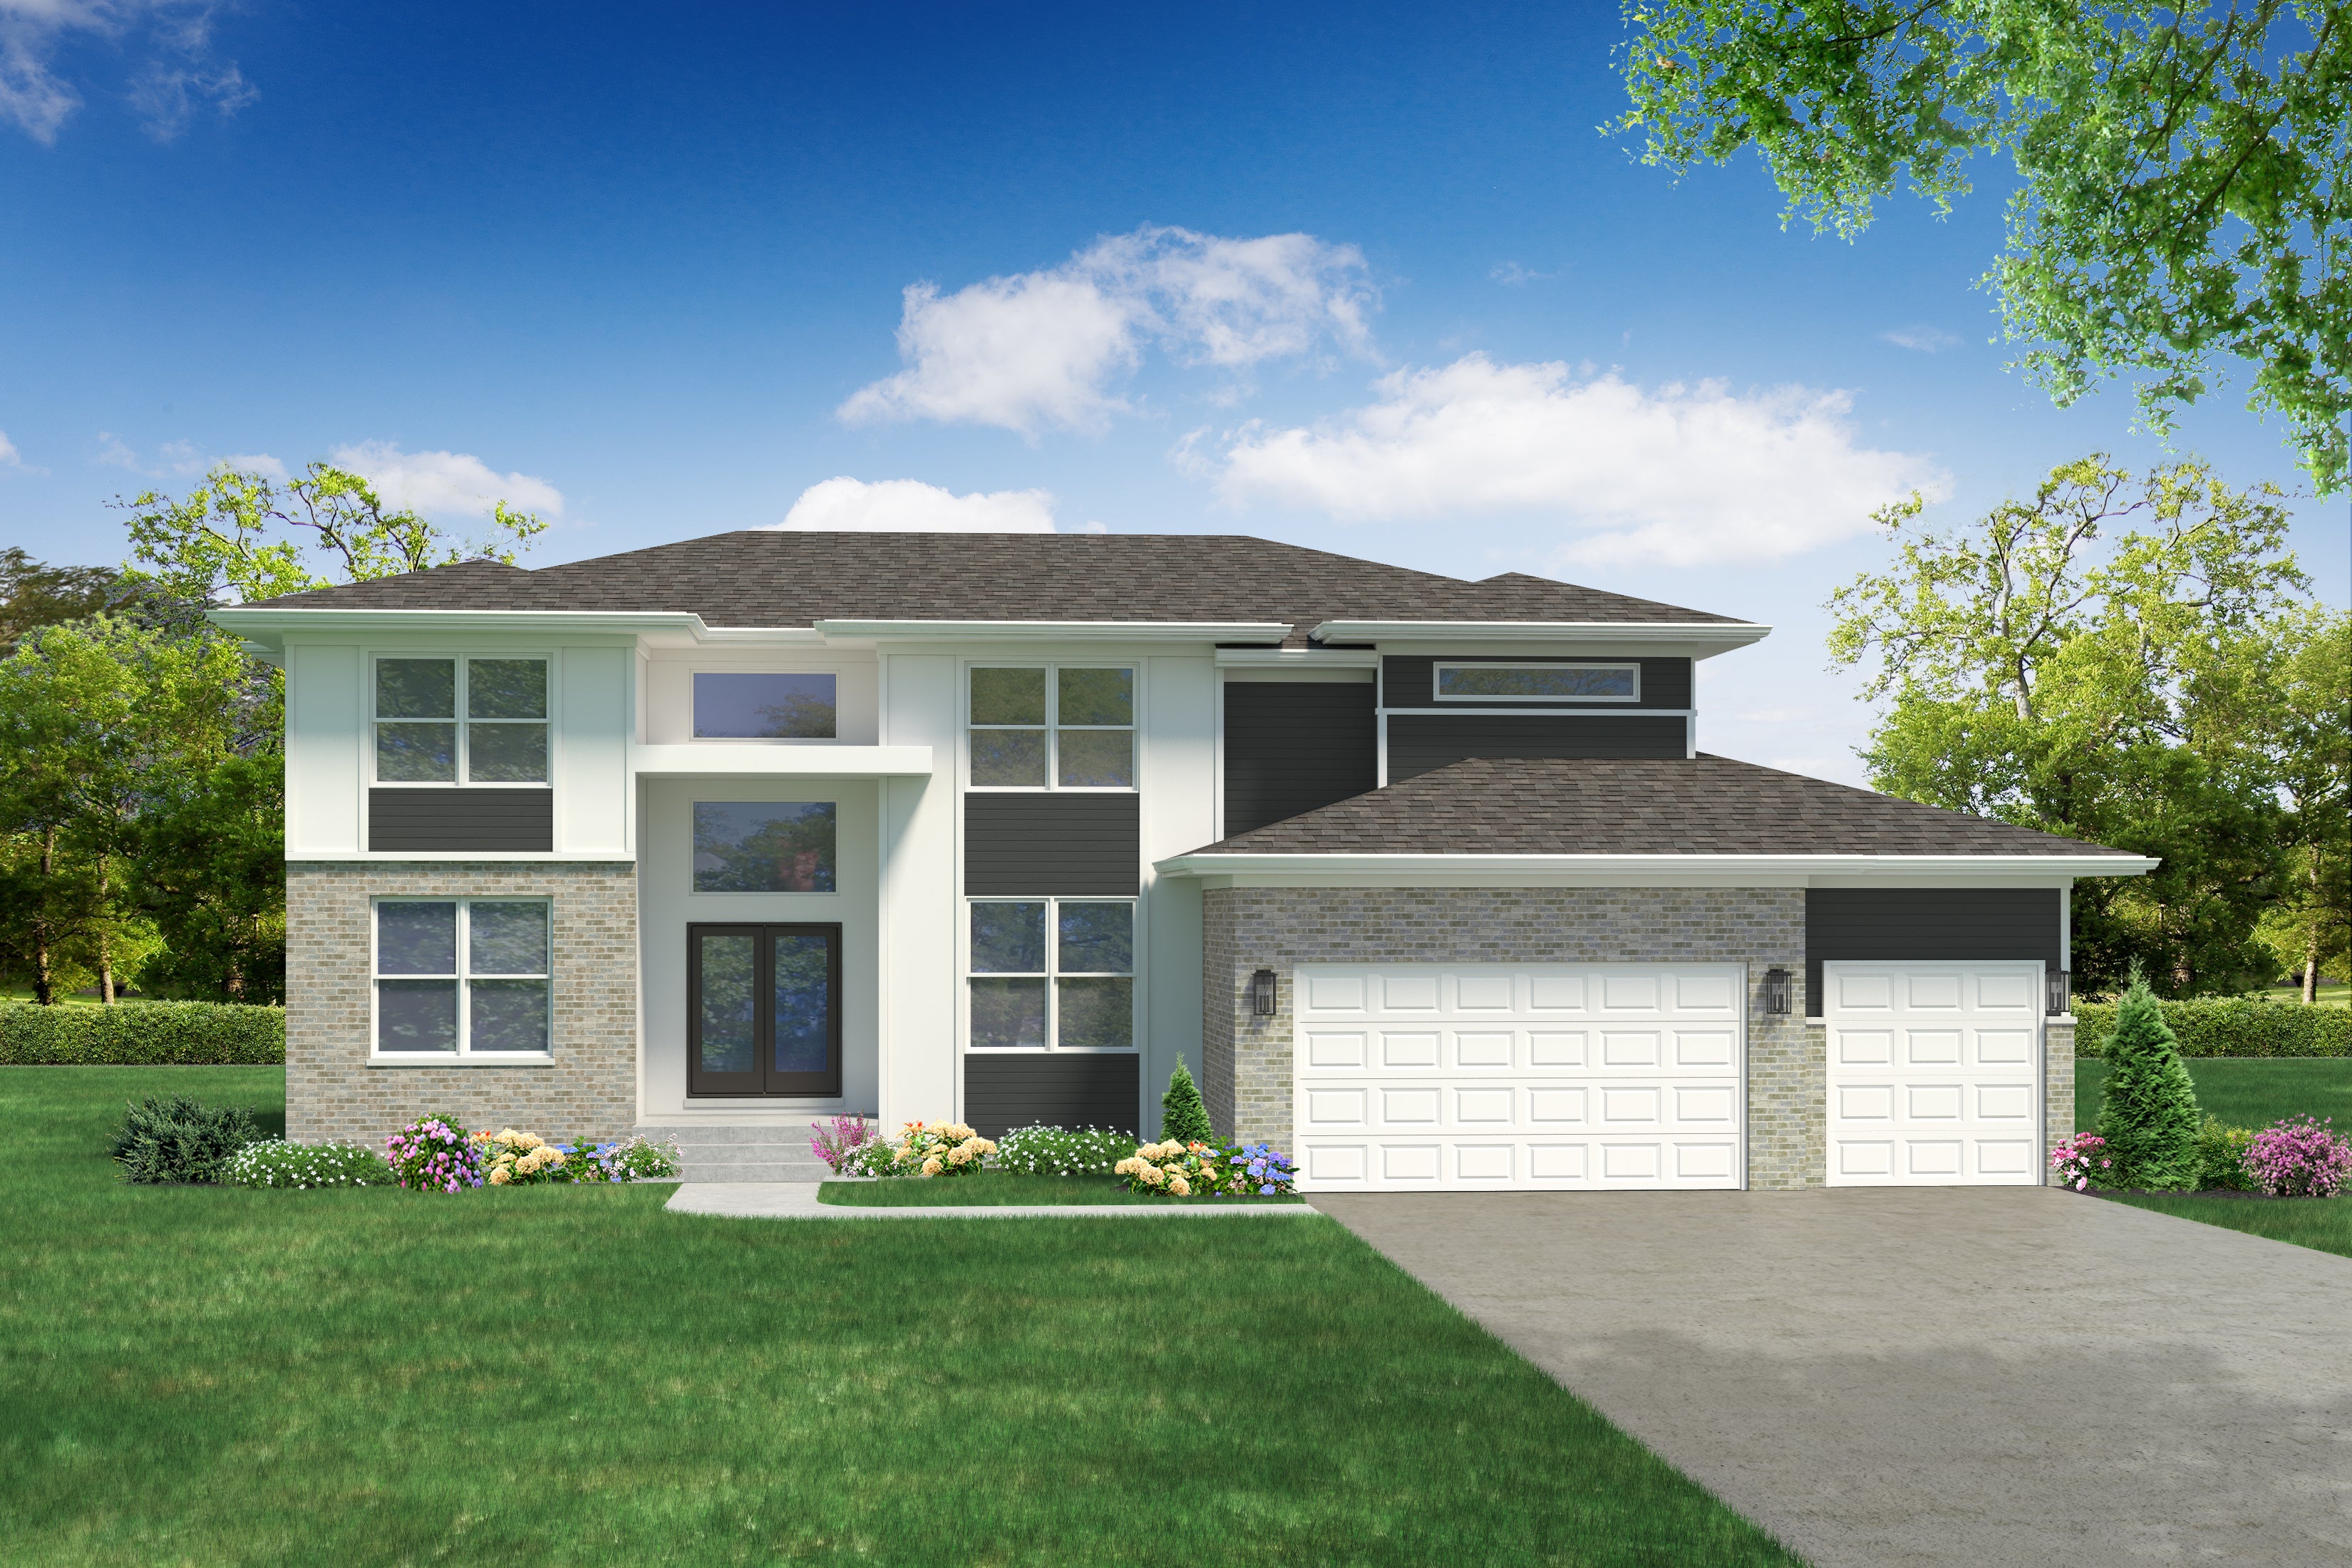 Featured Home of the Month: 3959 Caliente Circle